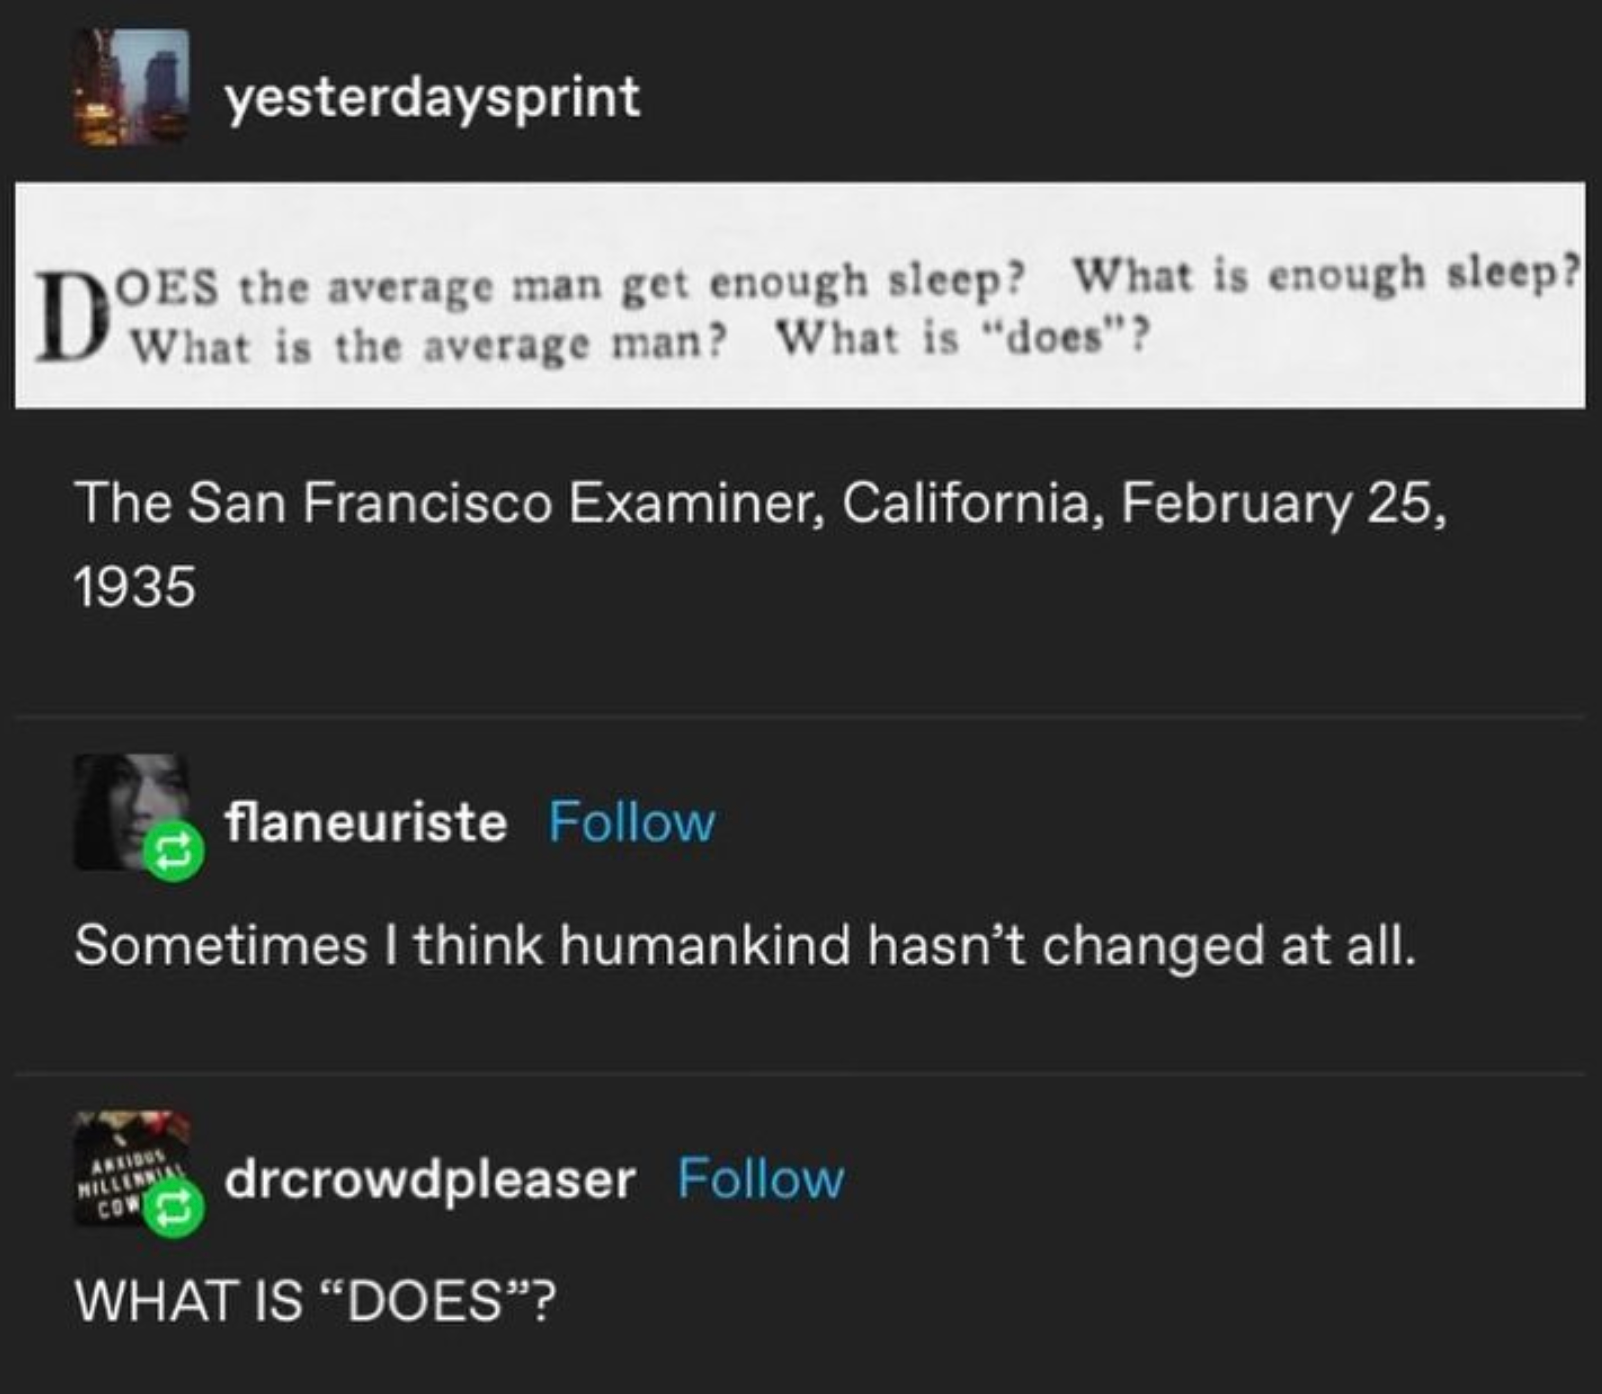 A screenshot of a Tumblr post that reads "yesterdaysprint: Does the average man get enough sleep? What is enough sleep? What is the average man? What is "does"? The San Francisco Examiner, California, February 25, 1935 flaneuriste: Sometimes I think humankind hasn't changed at all. drcrowdpleaser: WHAT IS "DOES"